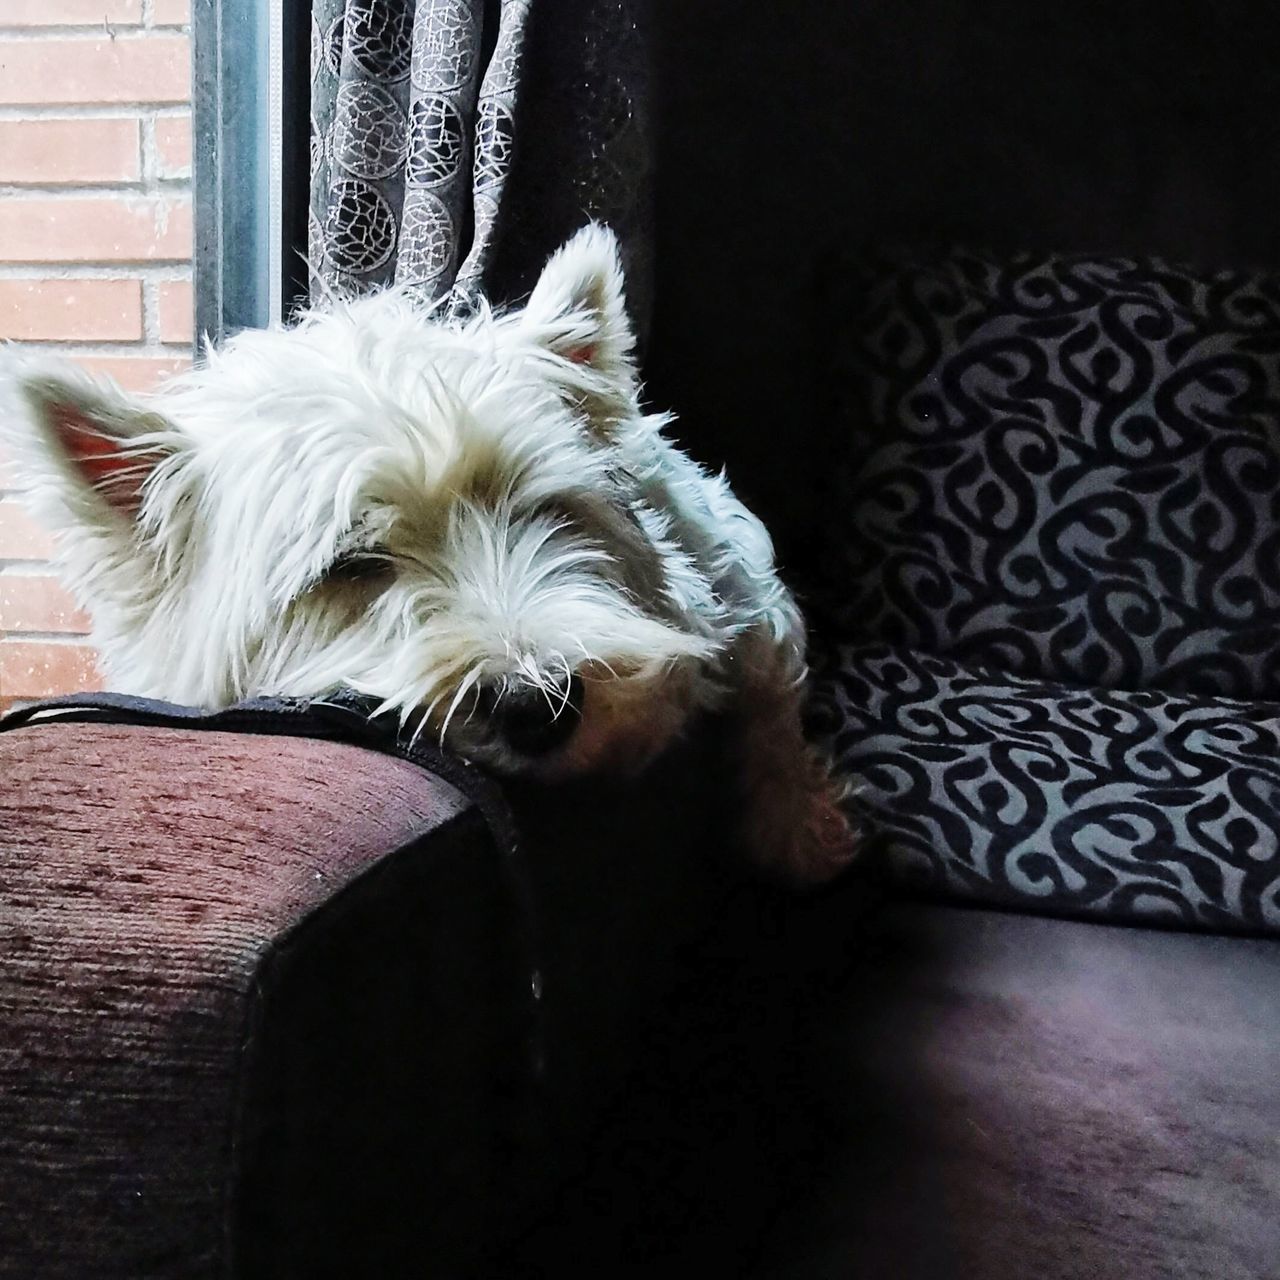 domestic animals, pet, animal themes, mammal, one animal, animal, dog, canine, west highland white terrier, white, indoors, terrier, relaxation, no people, lap dog, home interior, animal hair, furniture, animal body part, portrait, sofa, window